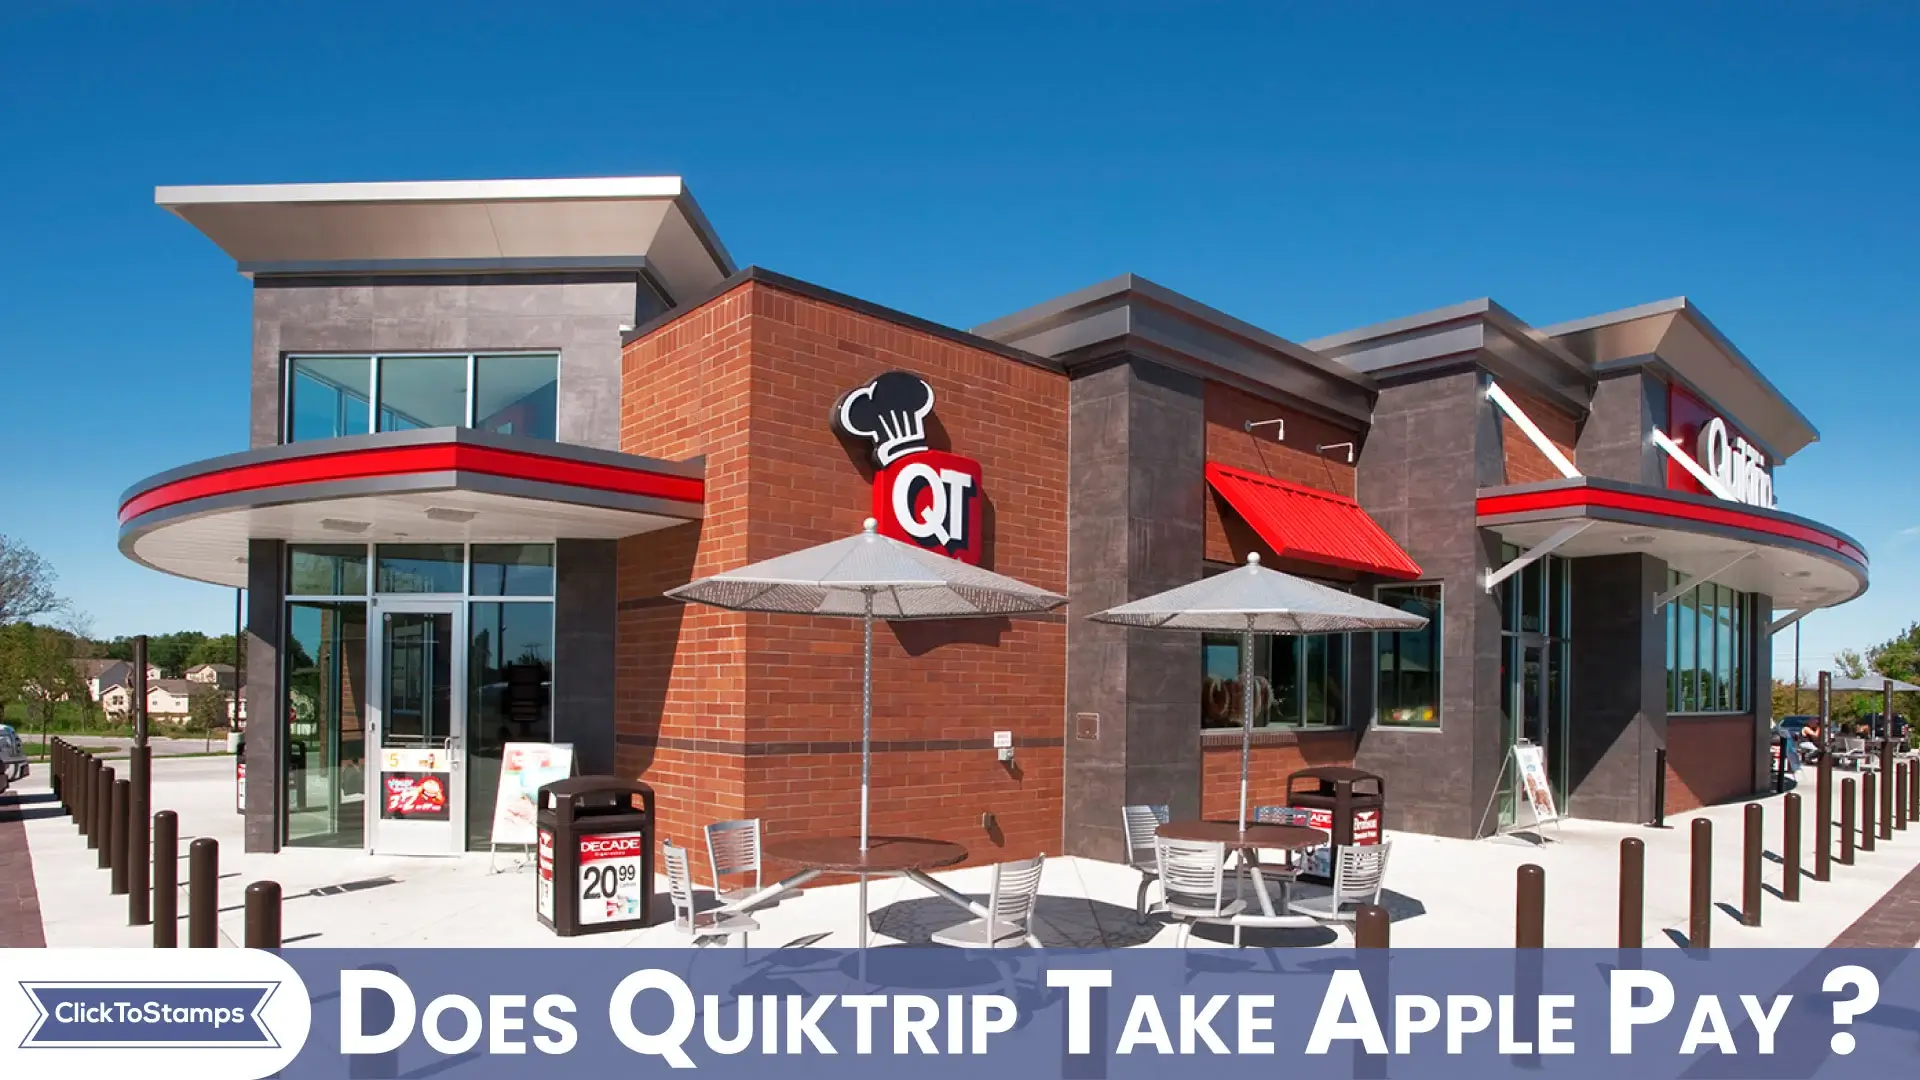 Does Quiktrip Take Apple Pay